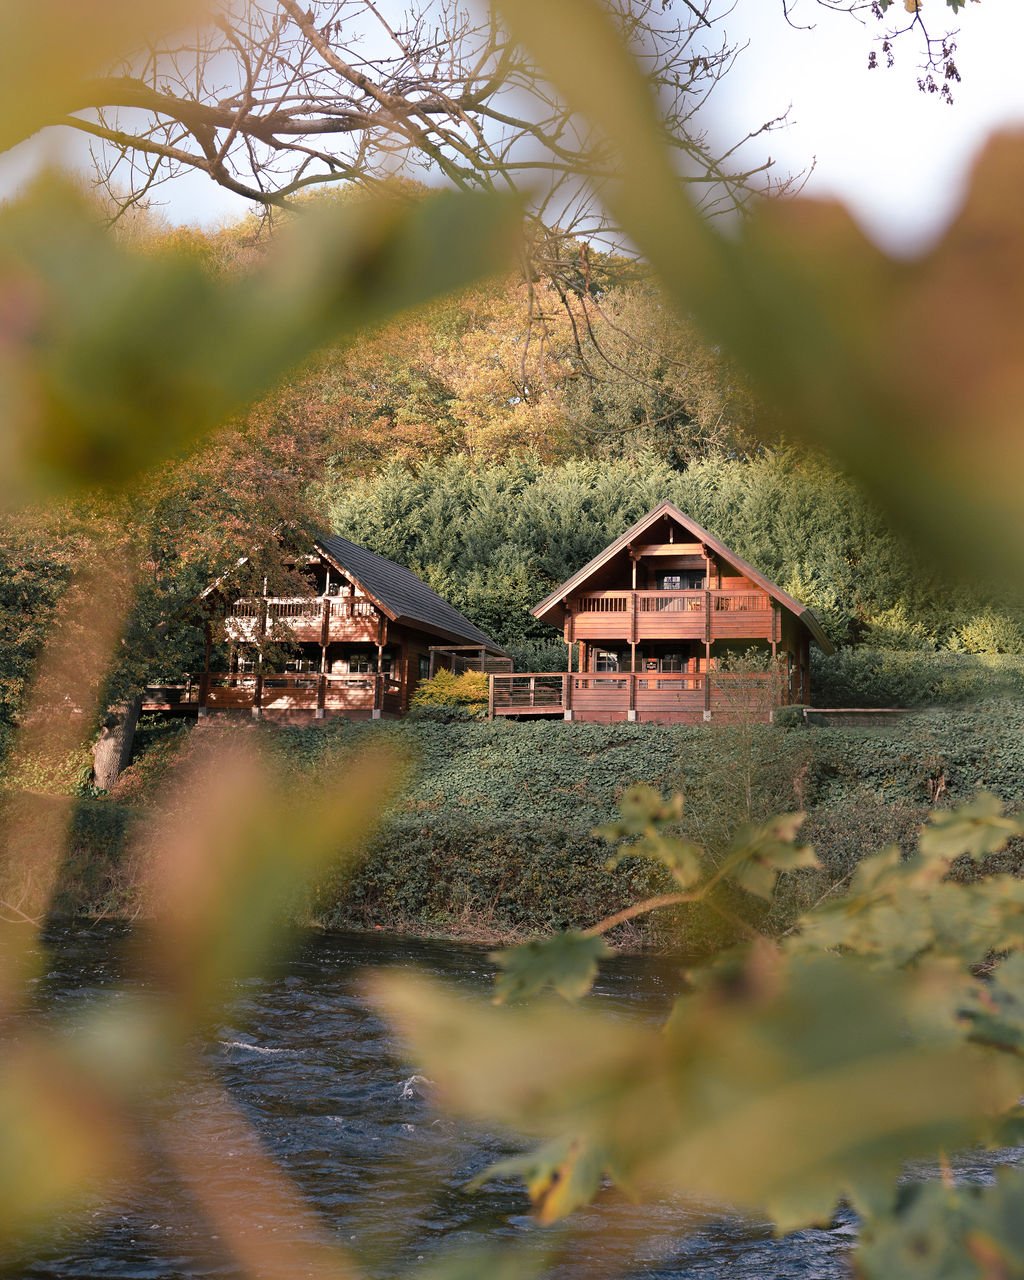  Welcome to   Coed-Y-Glyn Log Cabins    Take A Look  